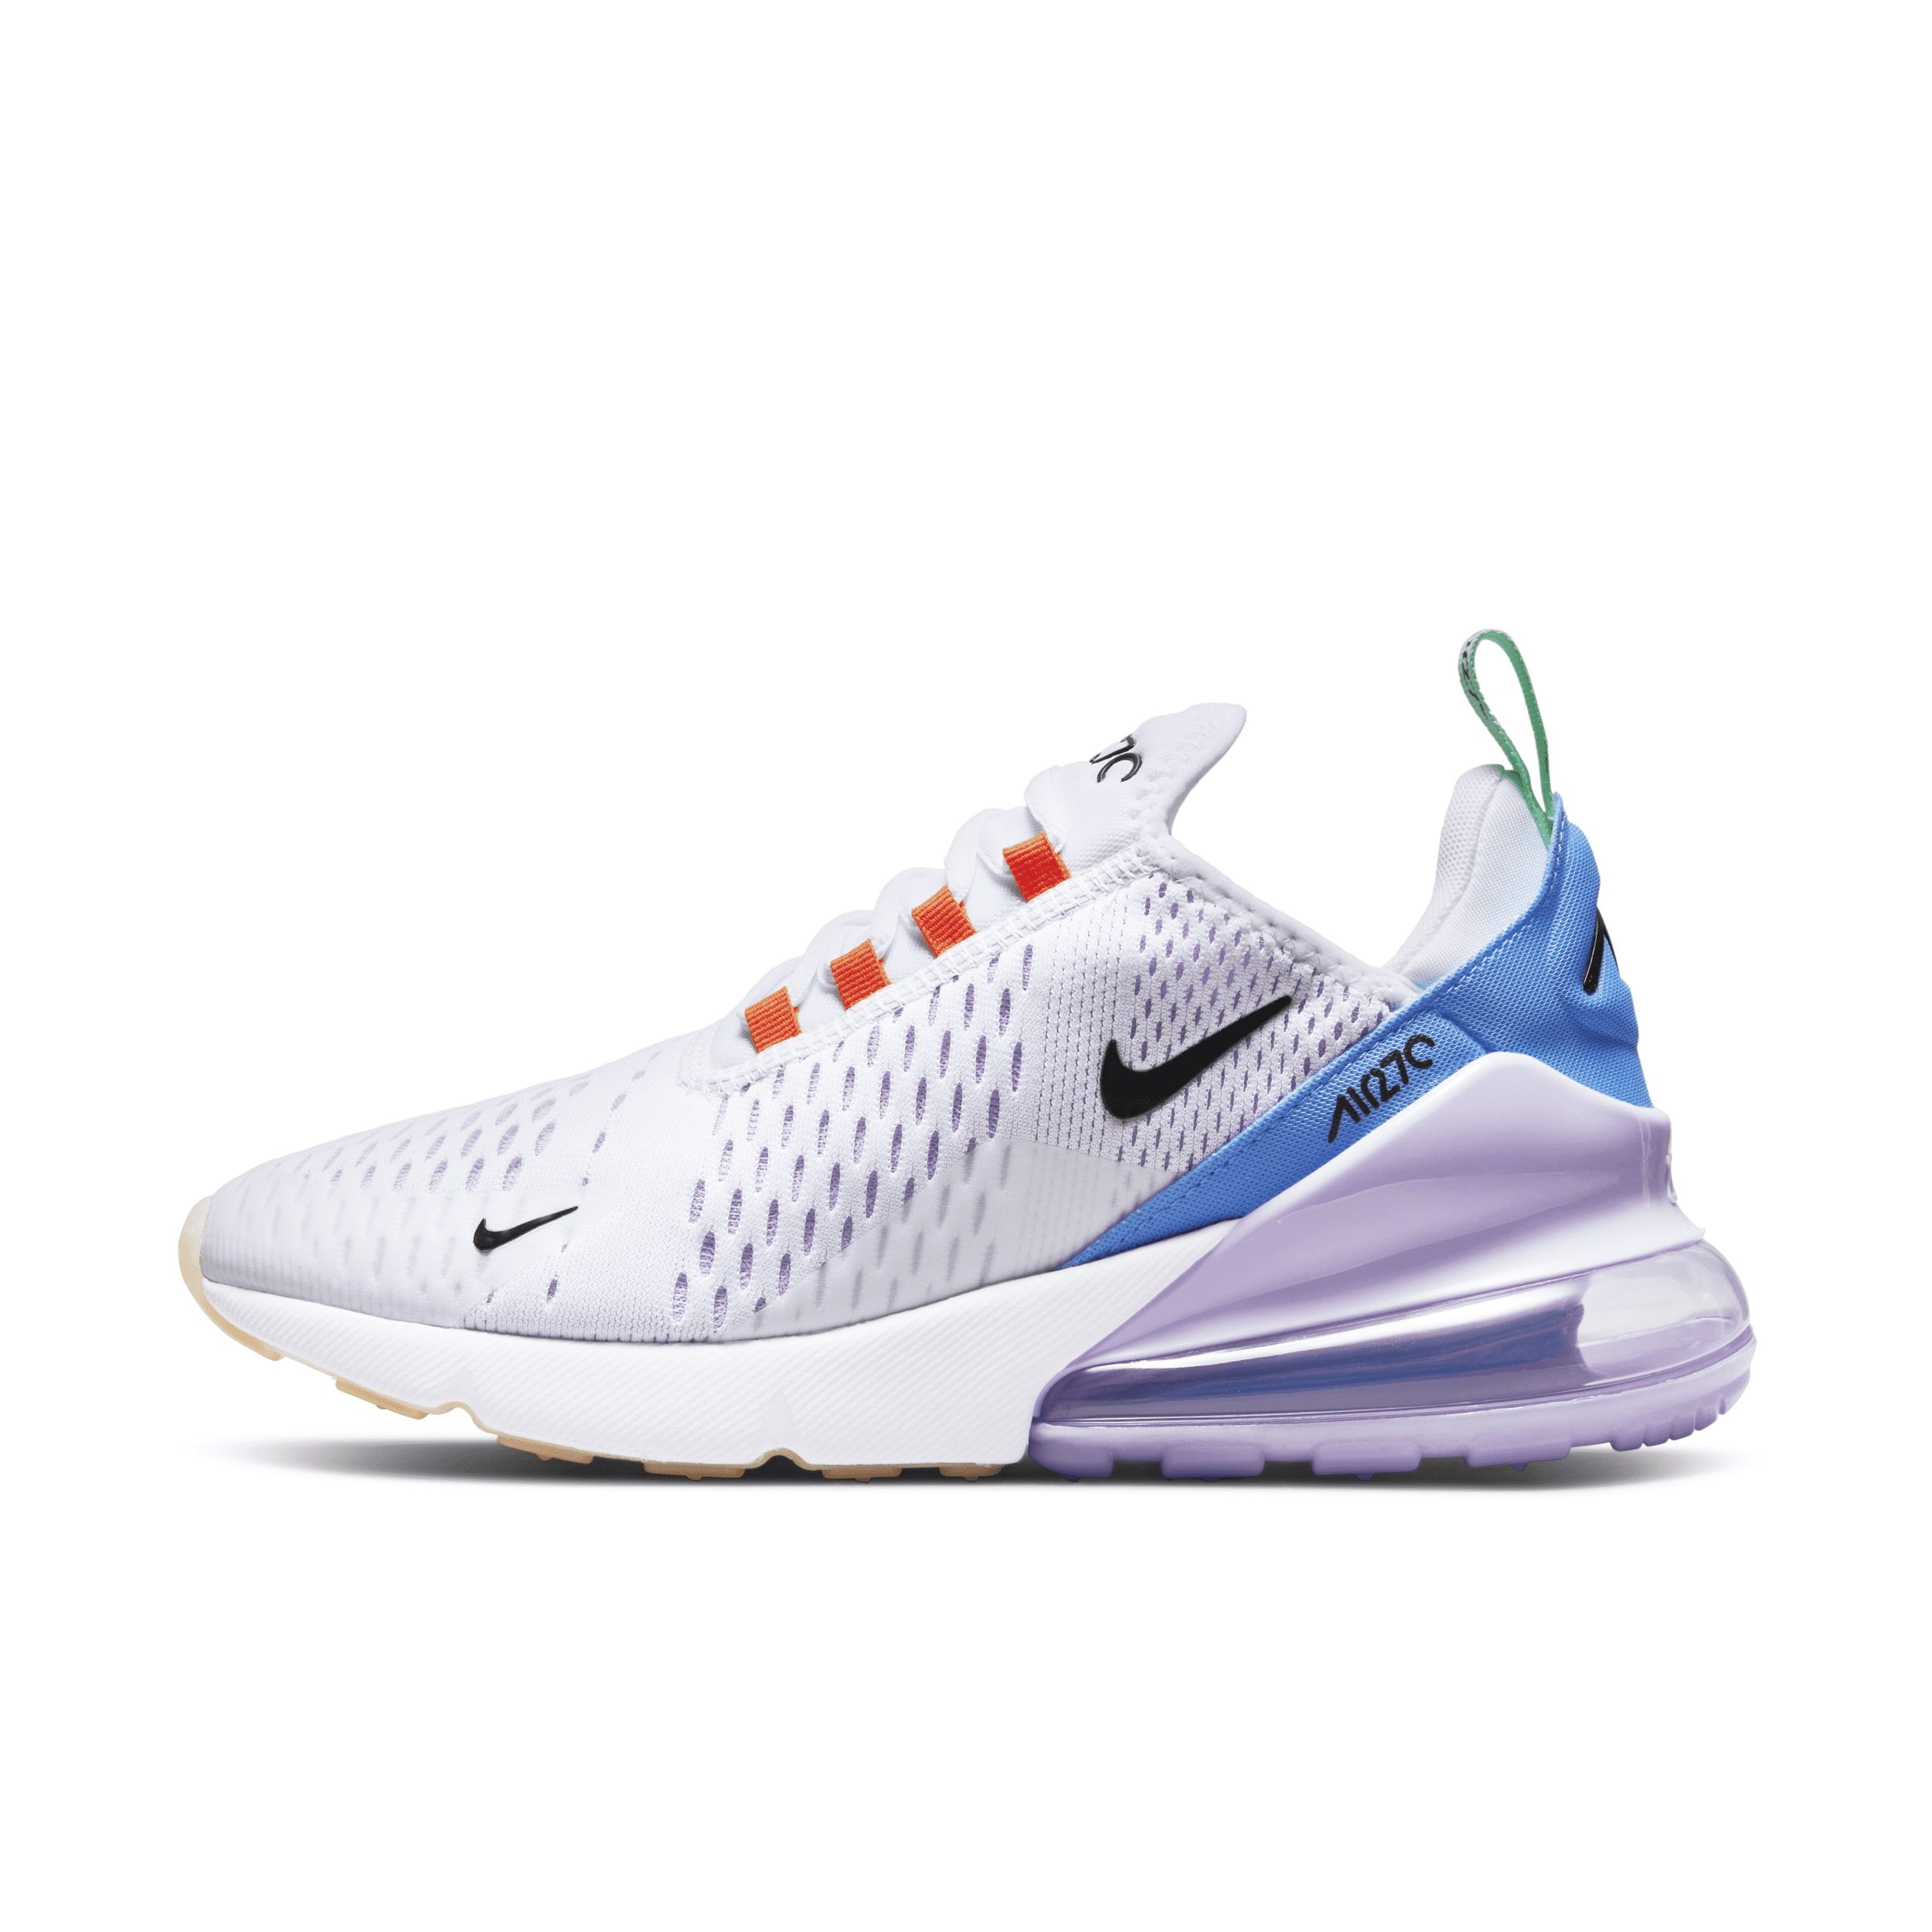 Nike Women's Air Max 270 Shoes in White, Size: 11 | DX2351-100 | Nike (US)